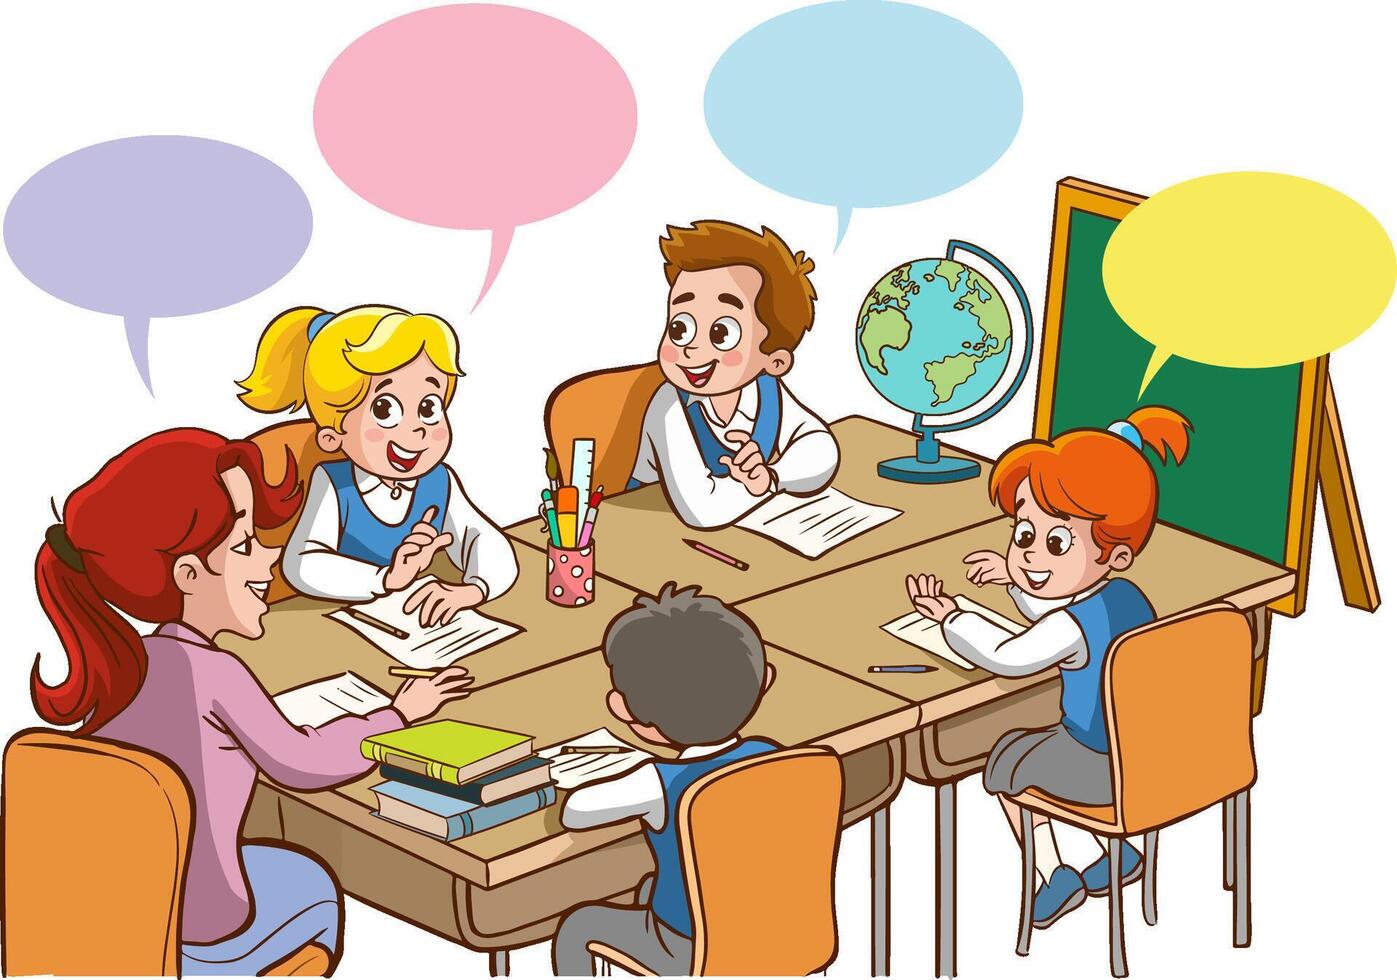 Vector Illustration of Children Education.students doing group work.students studying with the teacher in the classroom cartoon vector